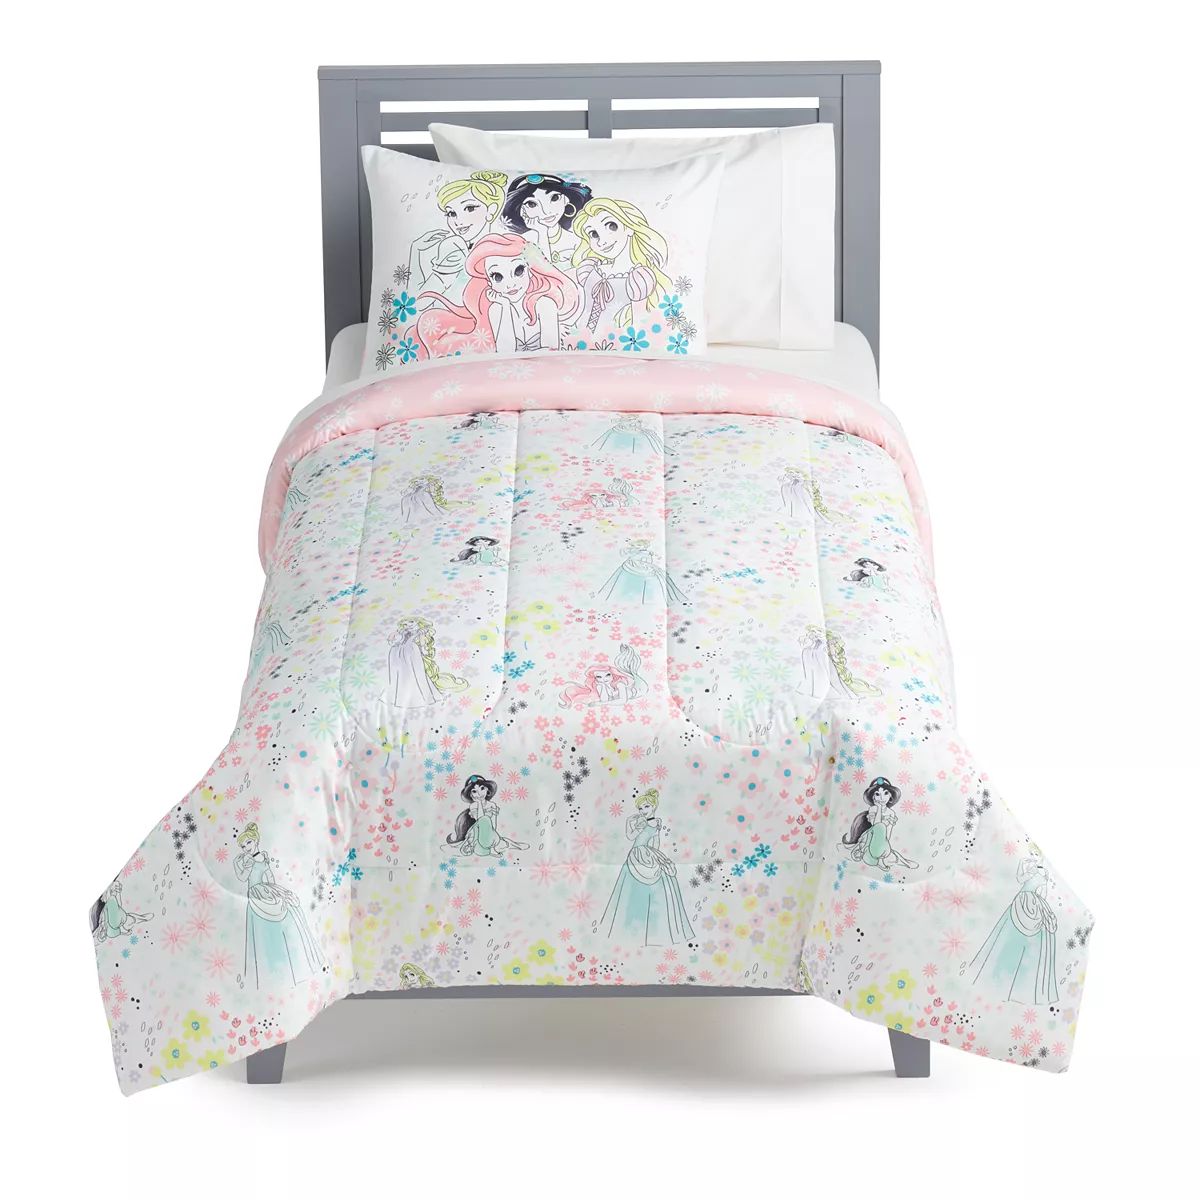 Disney Princess Floral Comforter Set with Shams by The Big One® | Kohl's